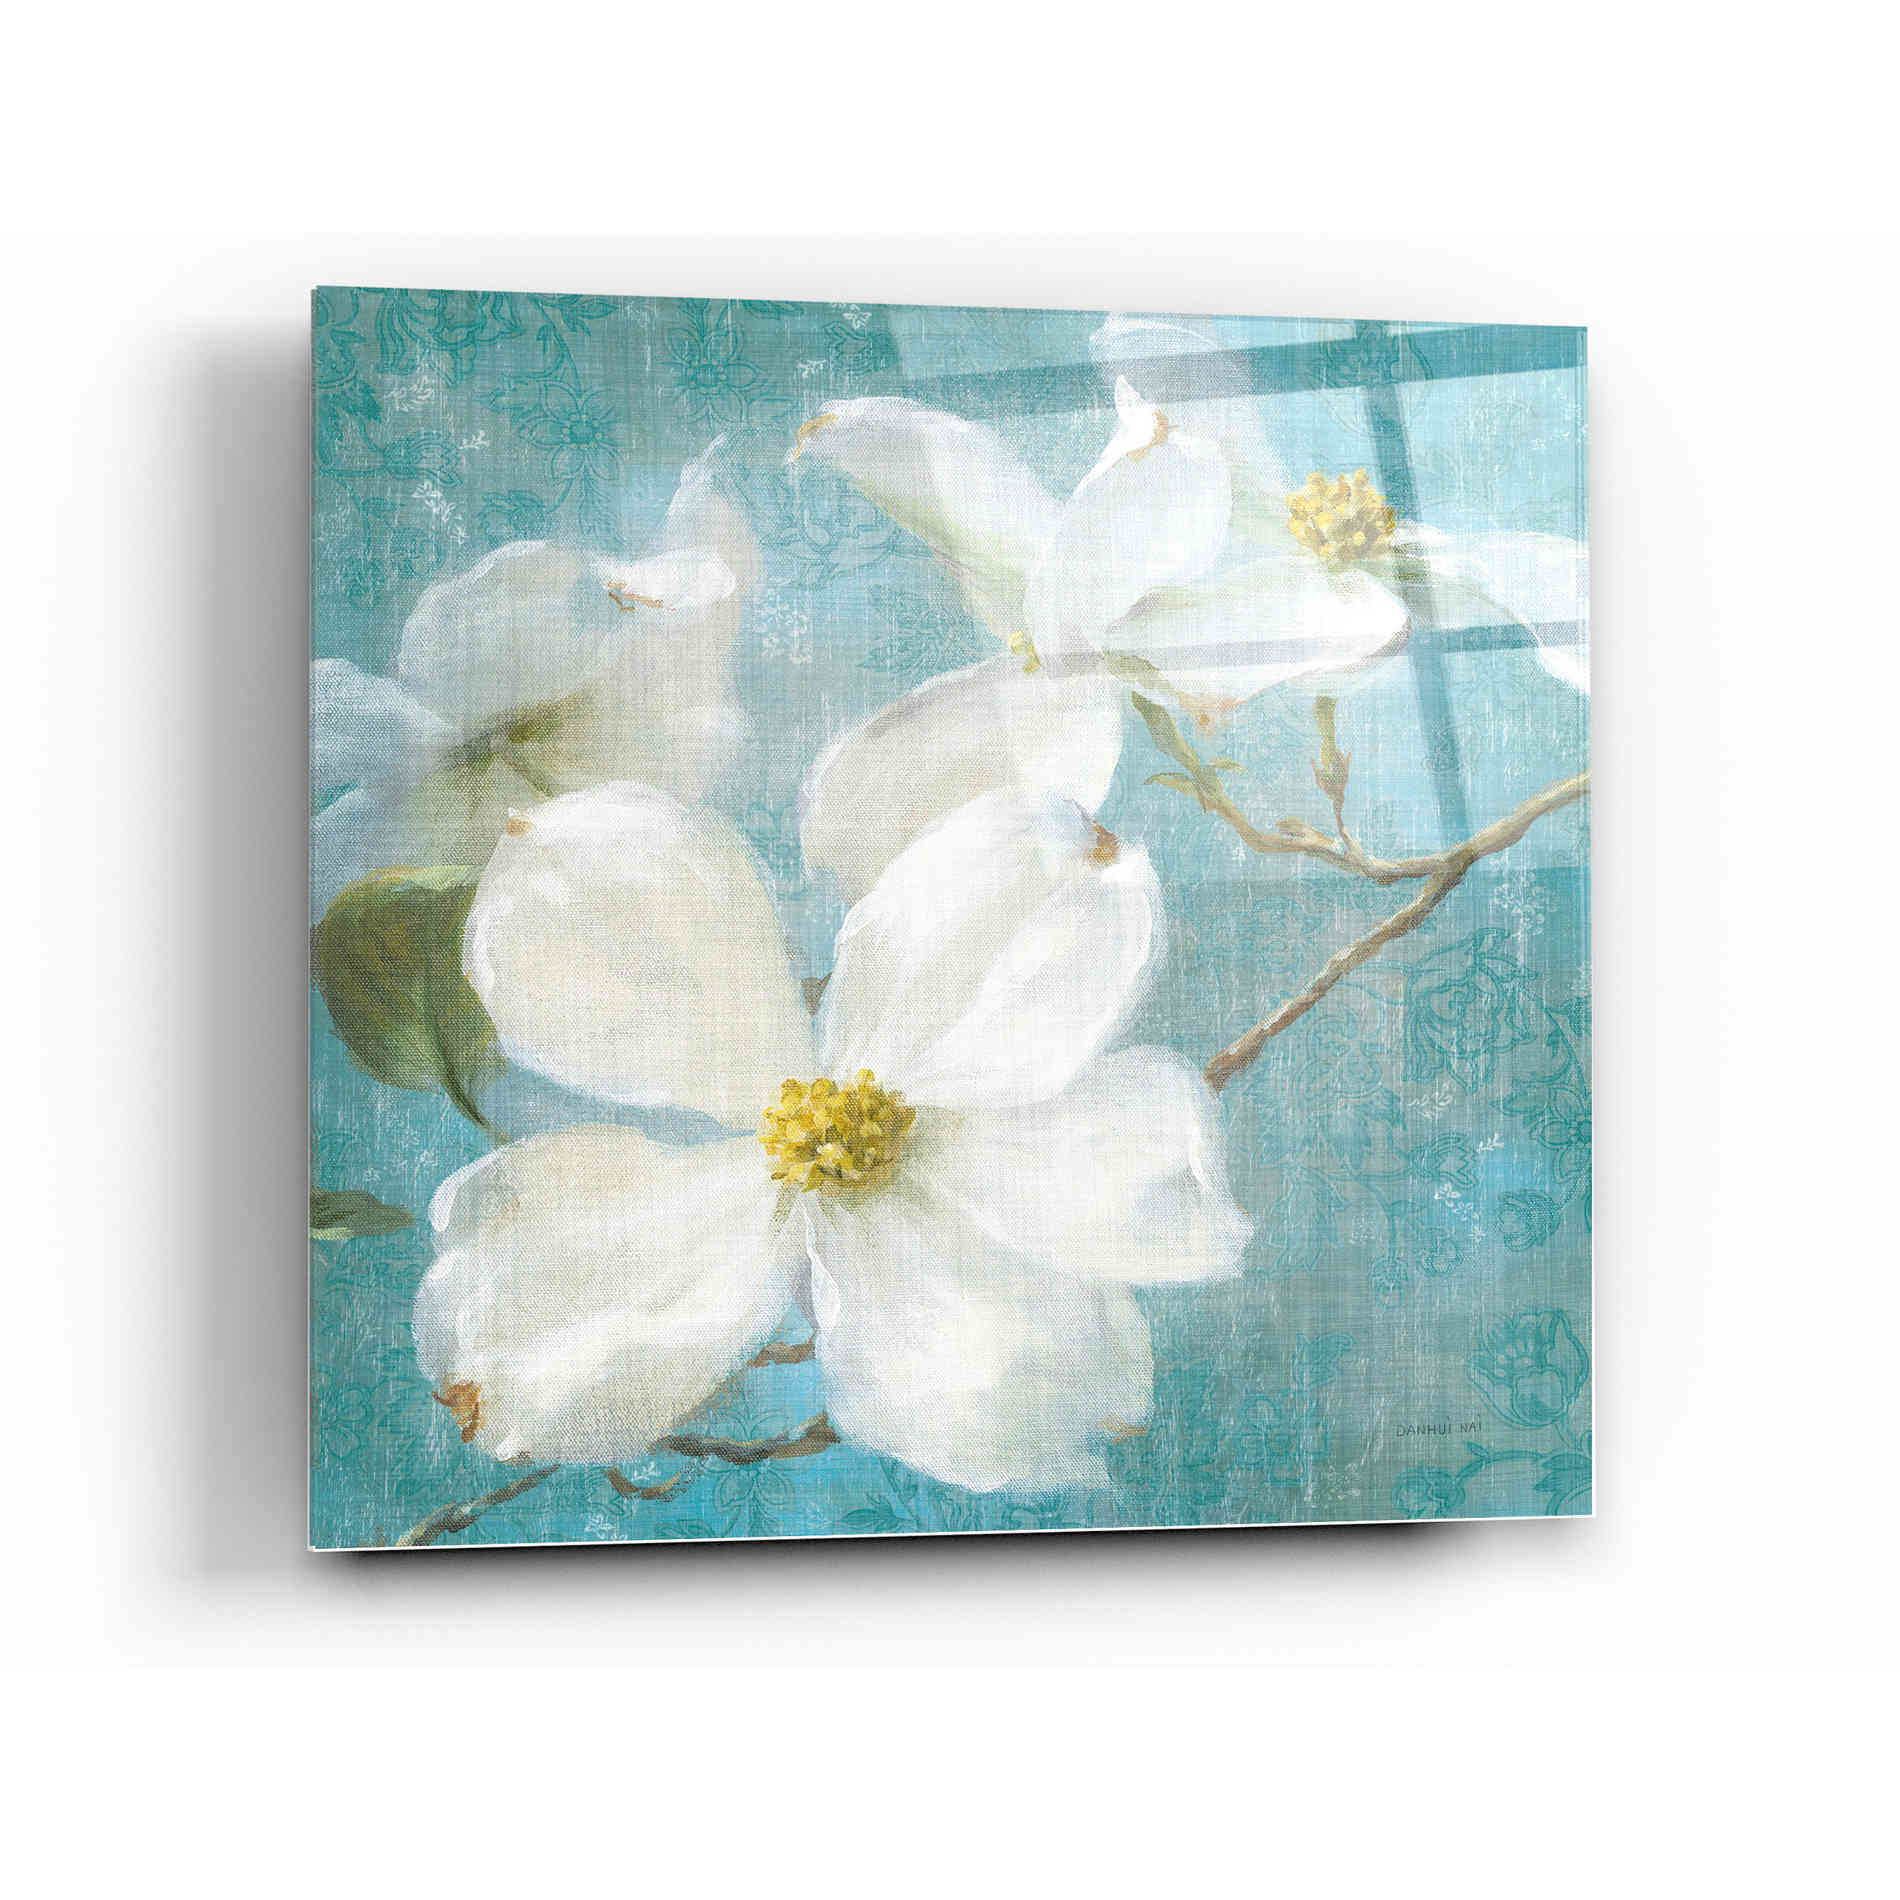 Epic Art 'Indiness Blossom Square Vintage I' by Danhui Nai, Acrylic Glass Wall Art,12x12